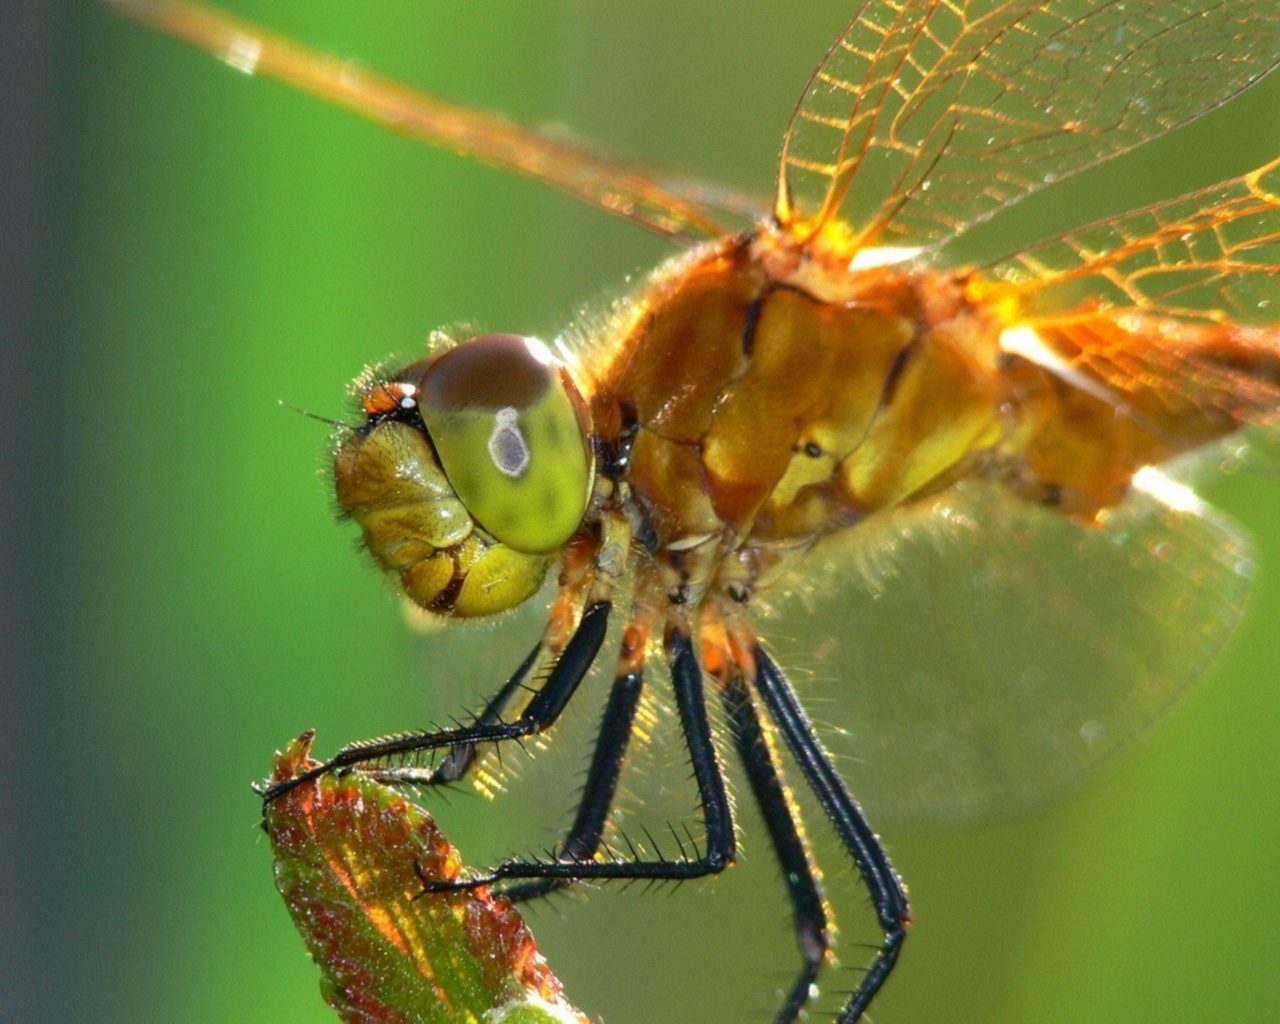 Dragonfly for 1280 x 1024 resolution